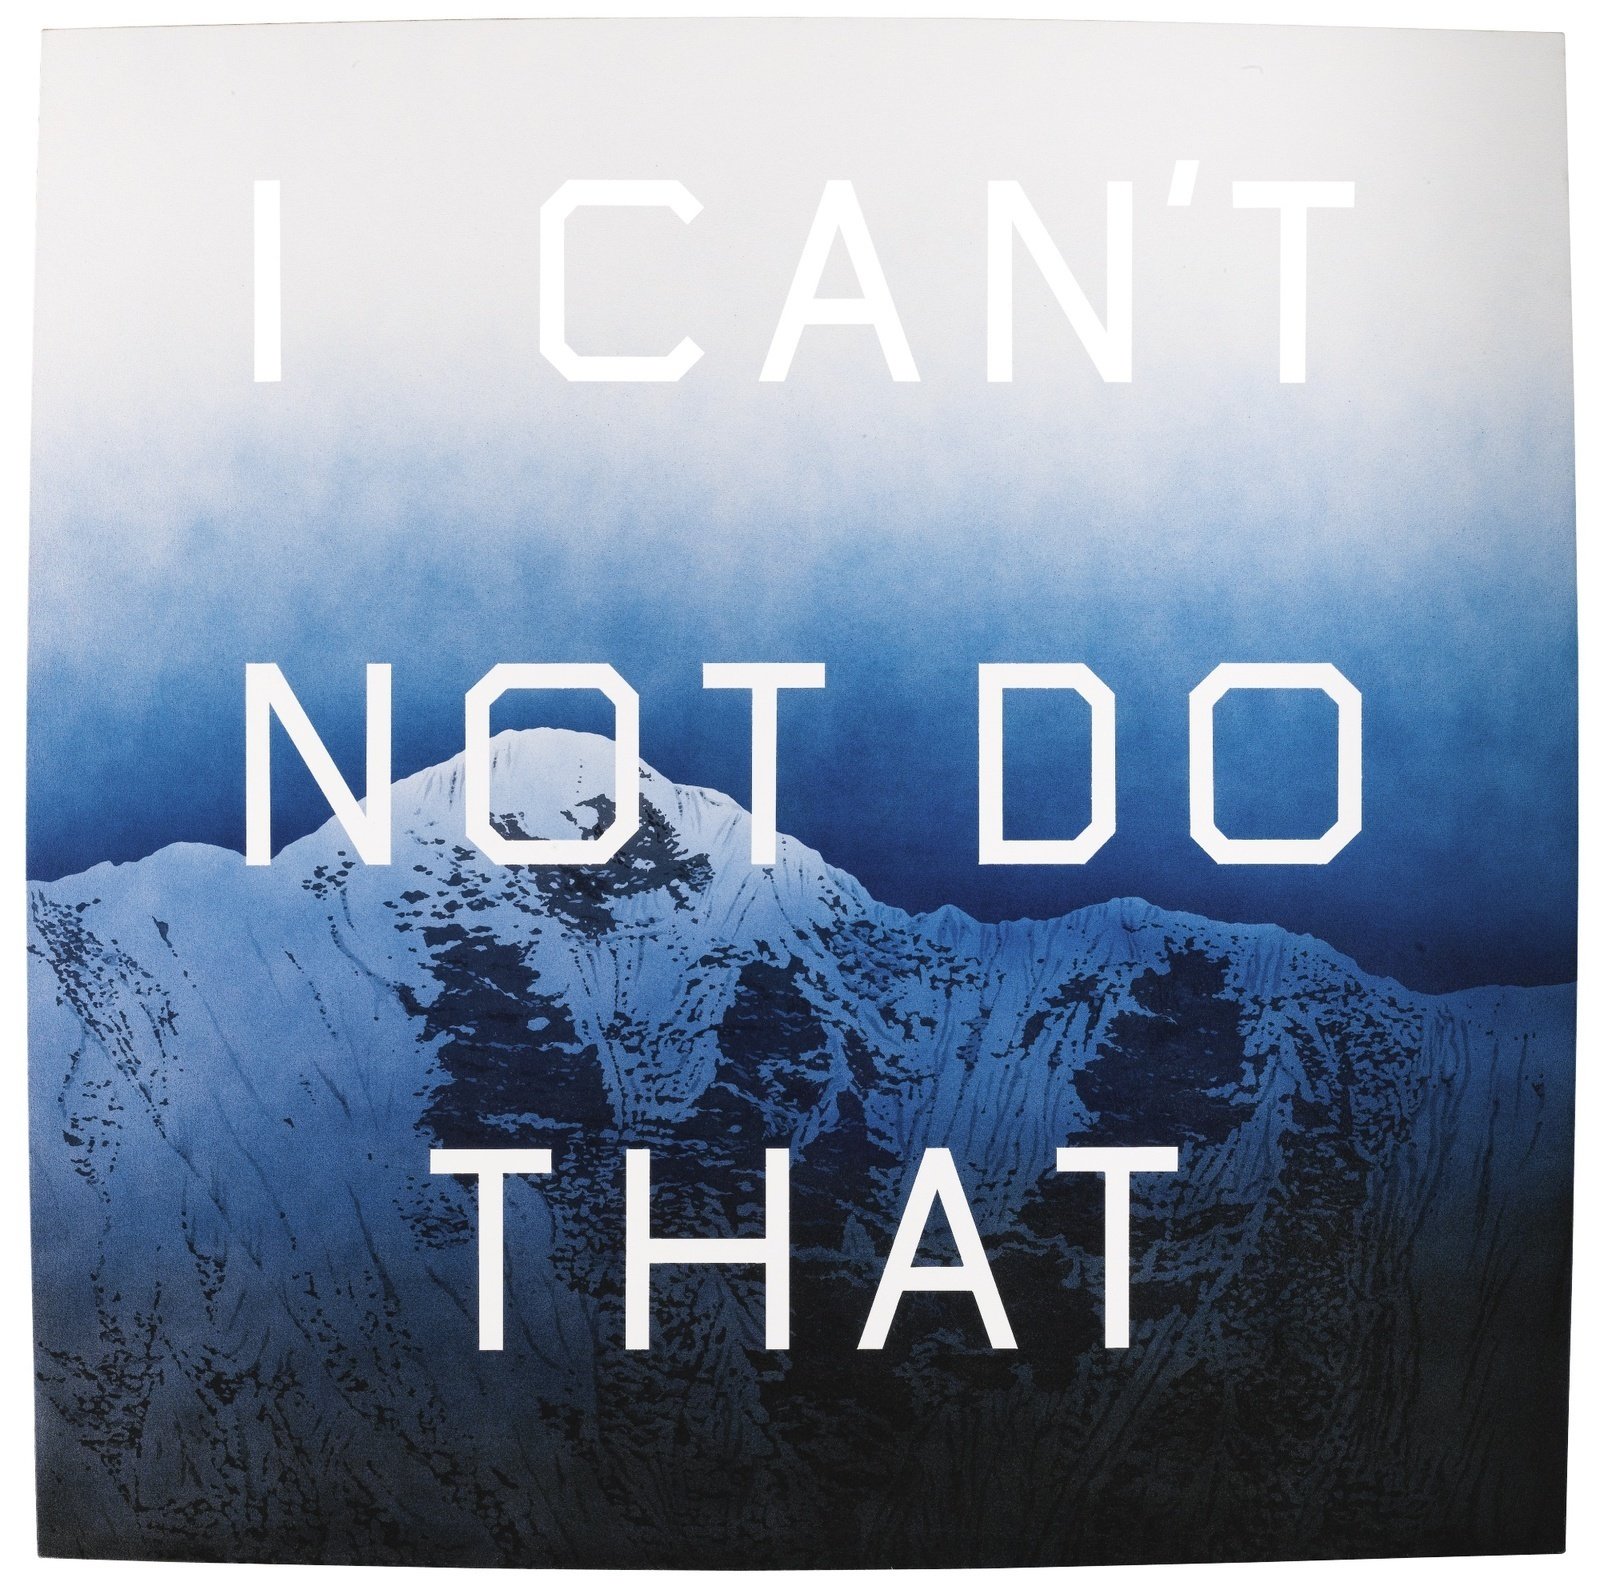 Ed Ruscha. I Can&rsquo;t Not Do That. 1998.